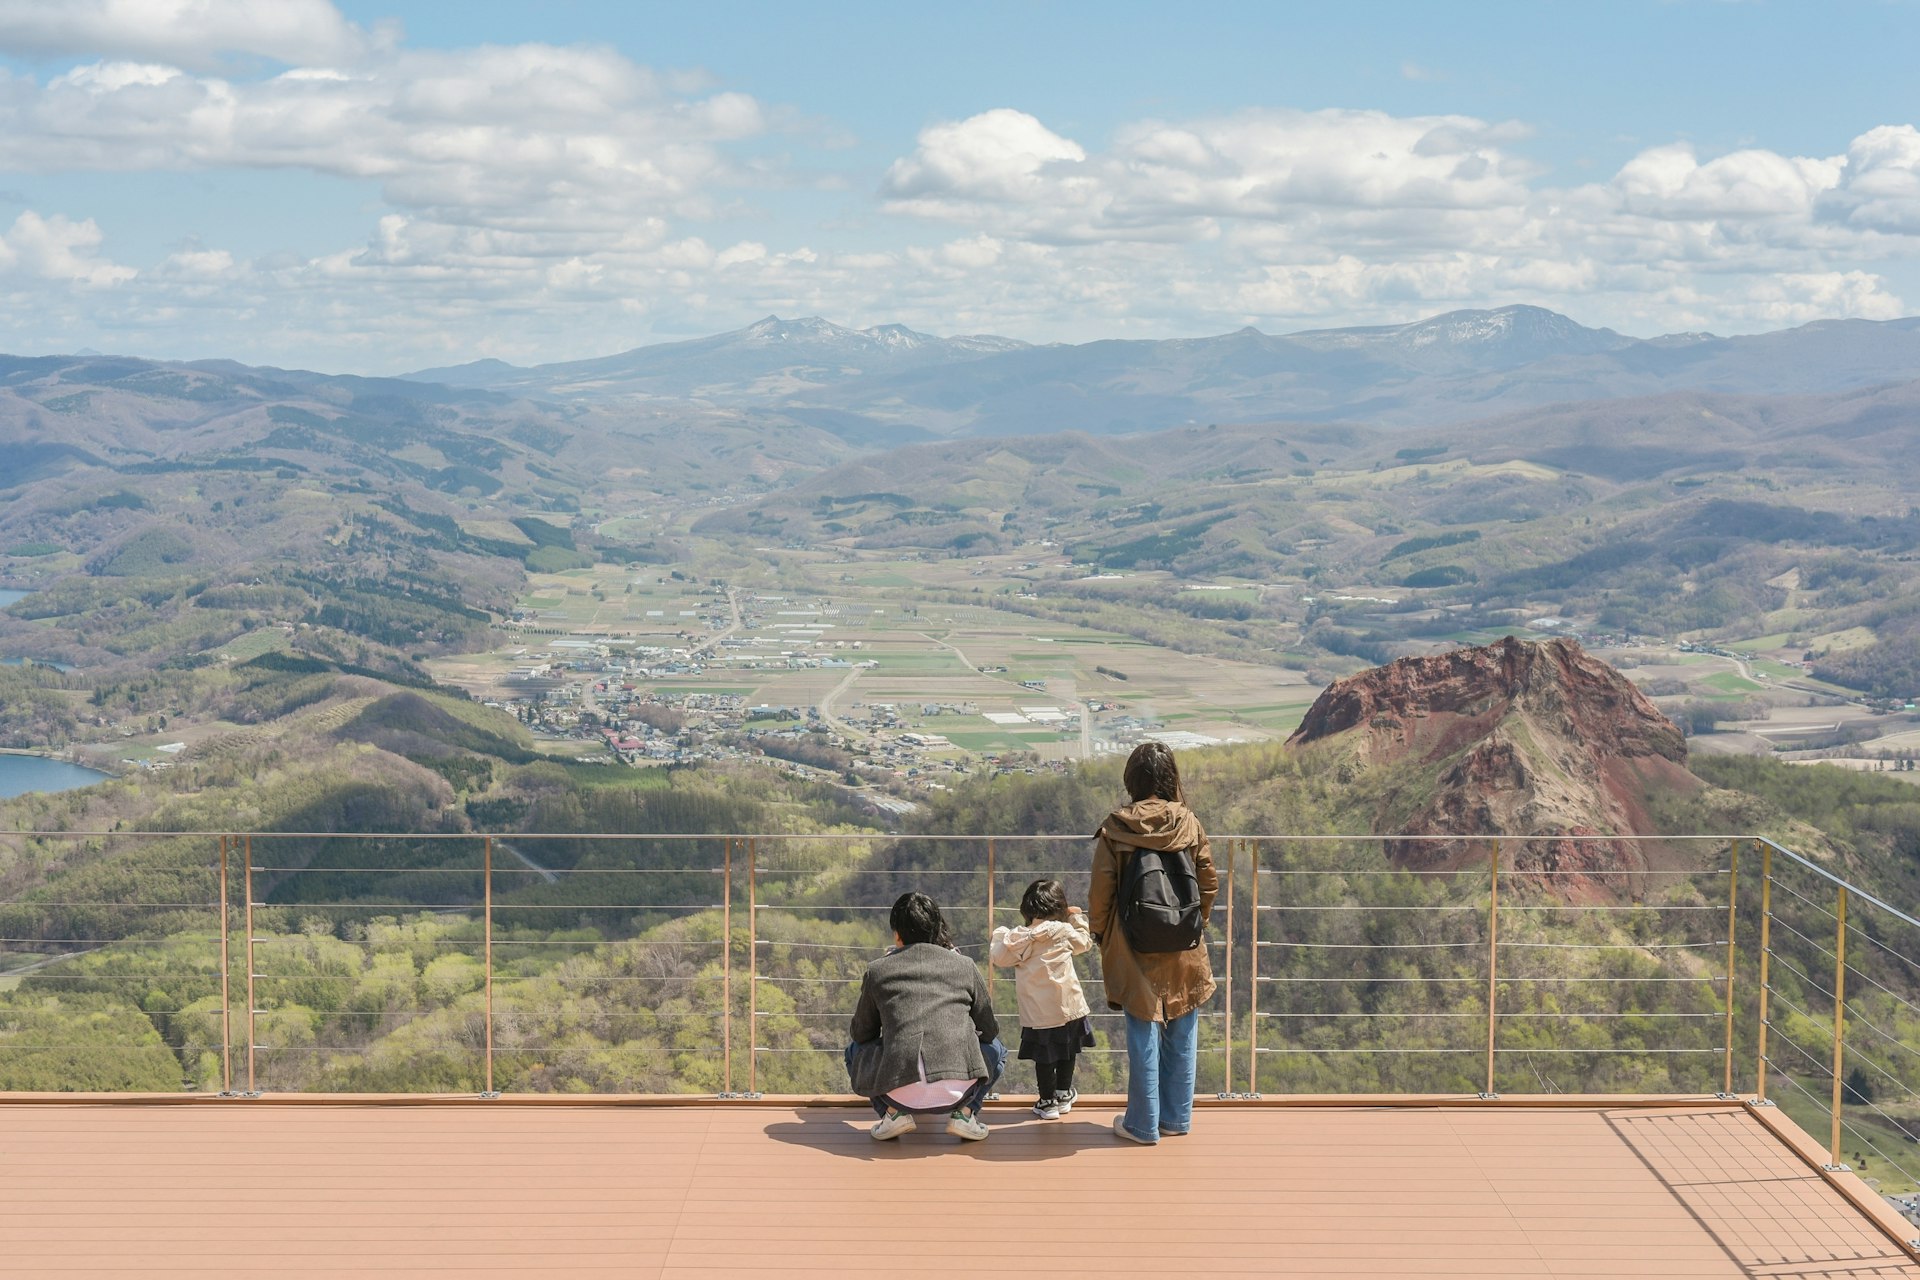 A small family group look out over a vast landscape from a viewpoint